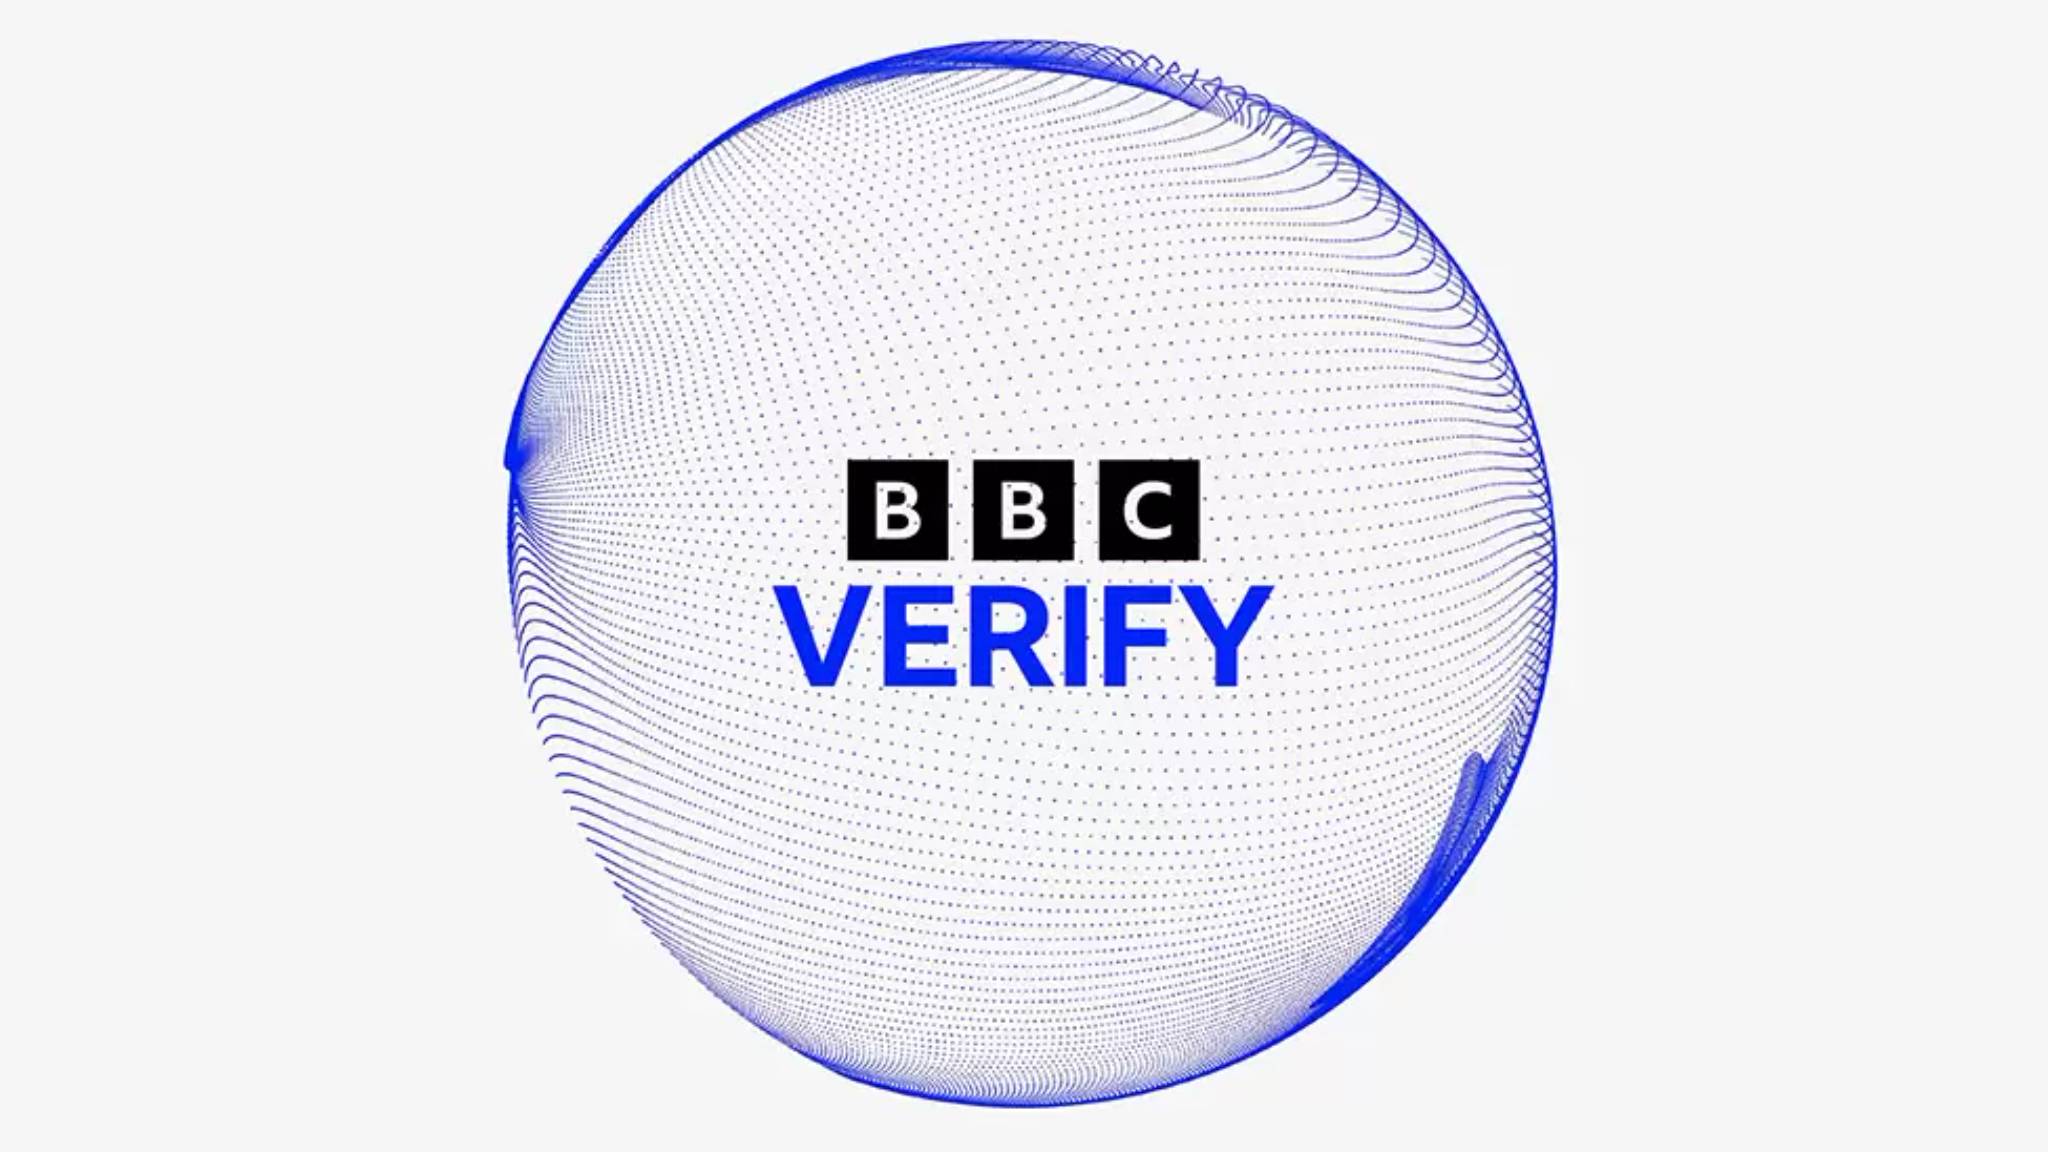 BBC Verify includes audiences in fact-checking process